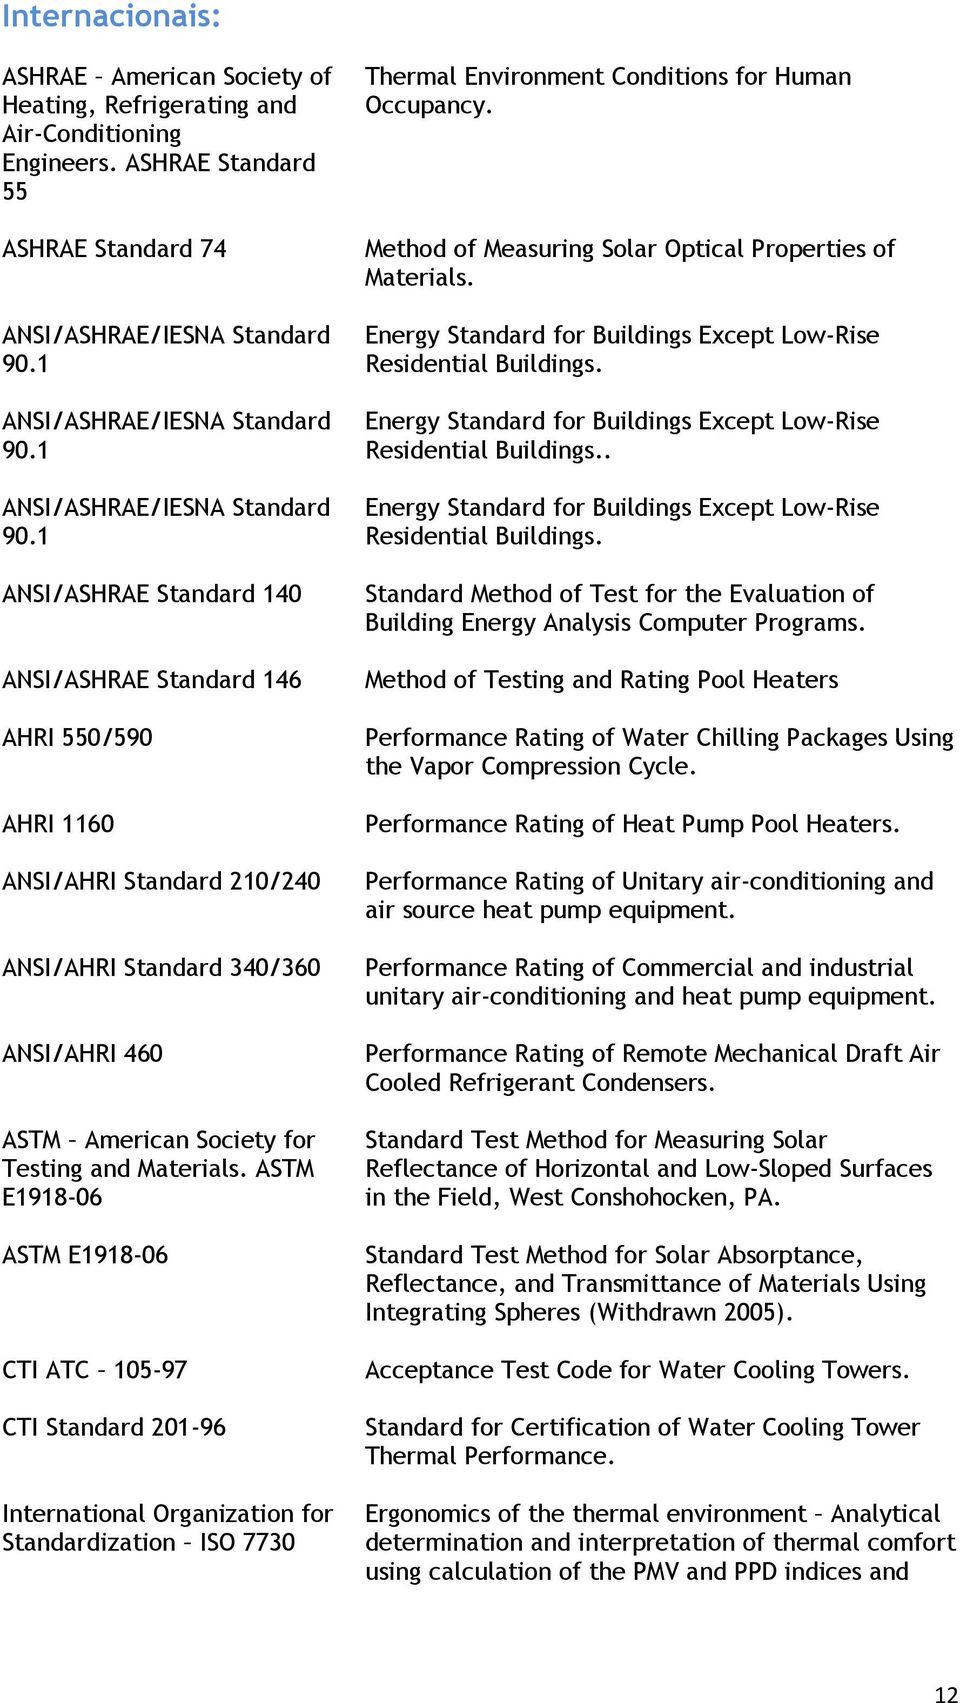 1 ANSI/ASHRAE Standard 140 ANSI/ASHRAE Standard 146 AHRI 550/590 AHRI 1160 ANSI/AHRI Standard 210/240 ANSI/AHRI Standard 340/360 ANSI/AHRI 460 ASTM American Society for Testing and Materials.